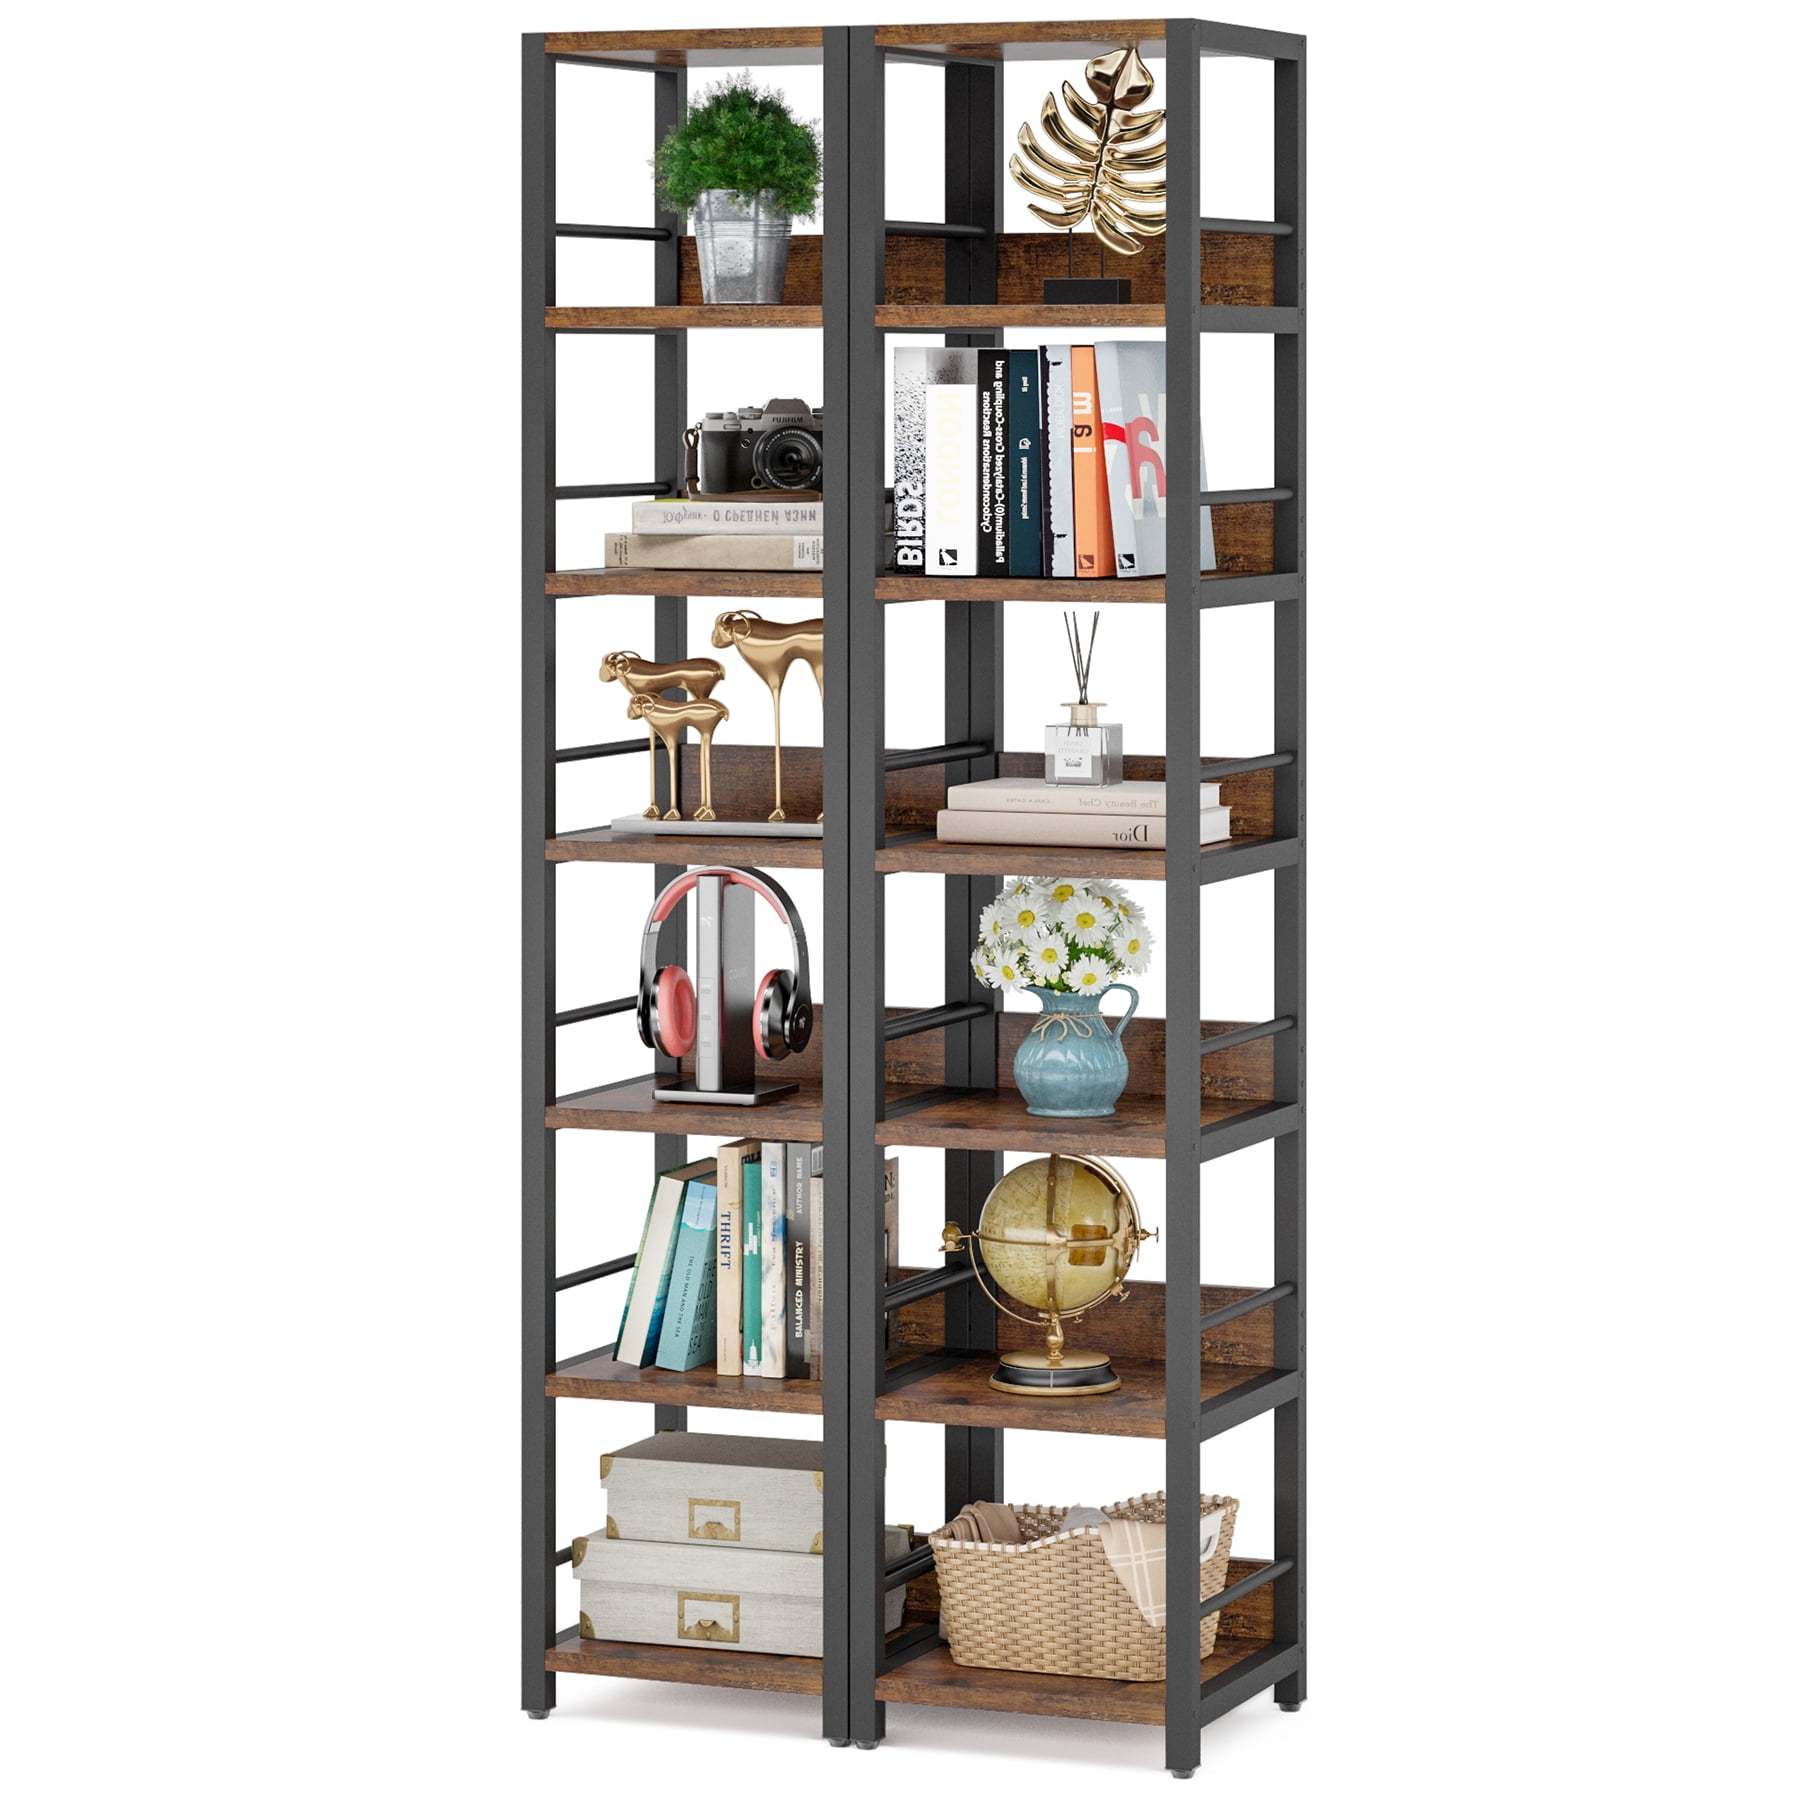 Tribesigns 6-Tier Corner Shelf, 75 Inch Tall Narrow Bookshelf Storage Rack,  Etagere Shelves Display Stand for Small Spaces, Rustic Open Bookcase